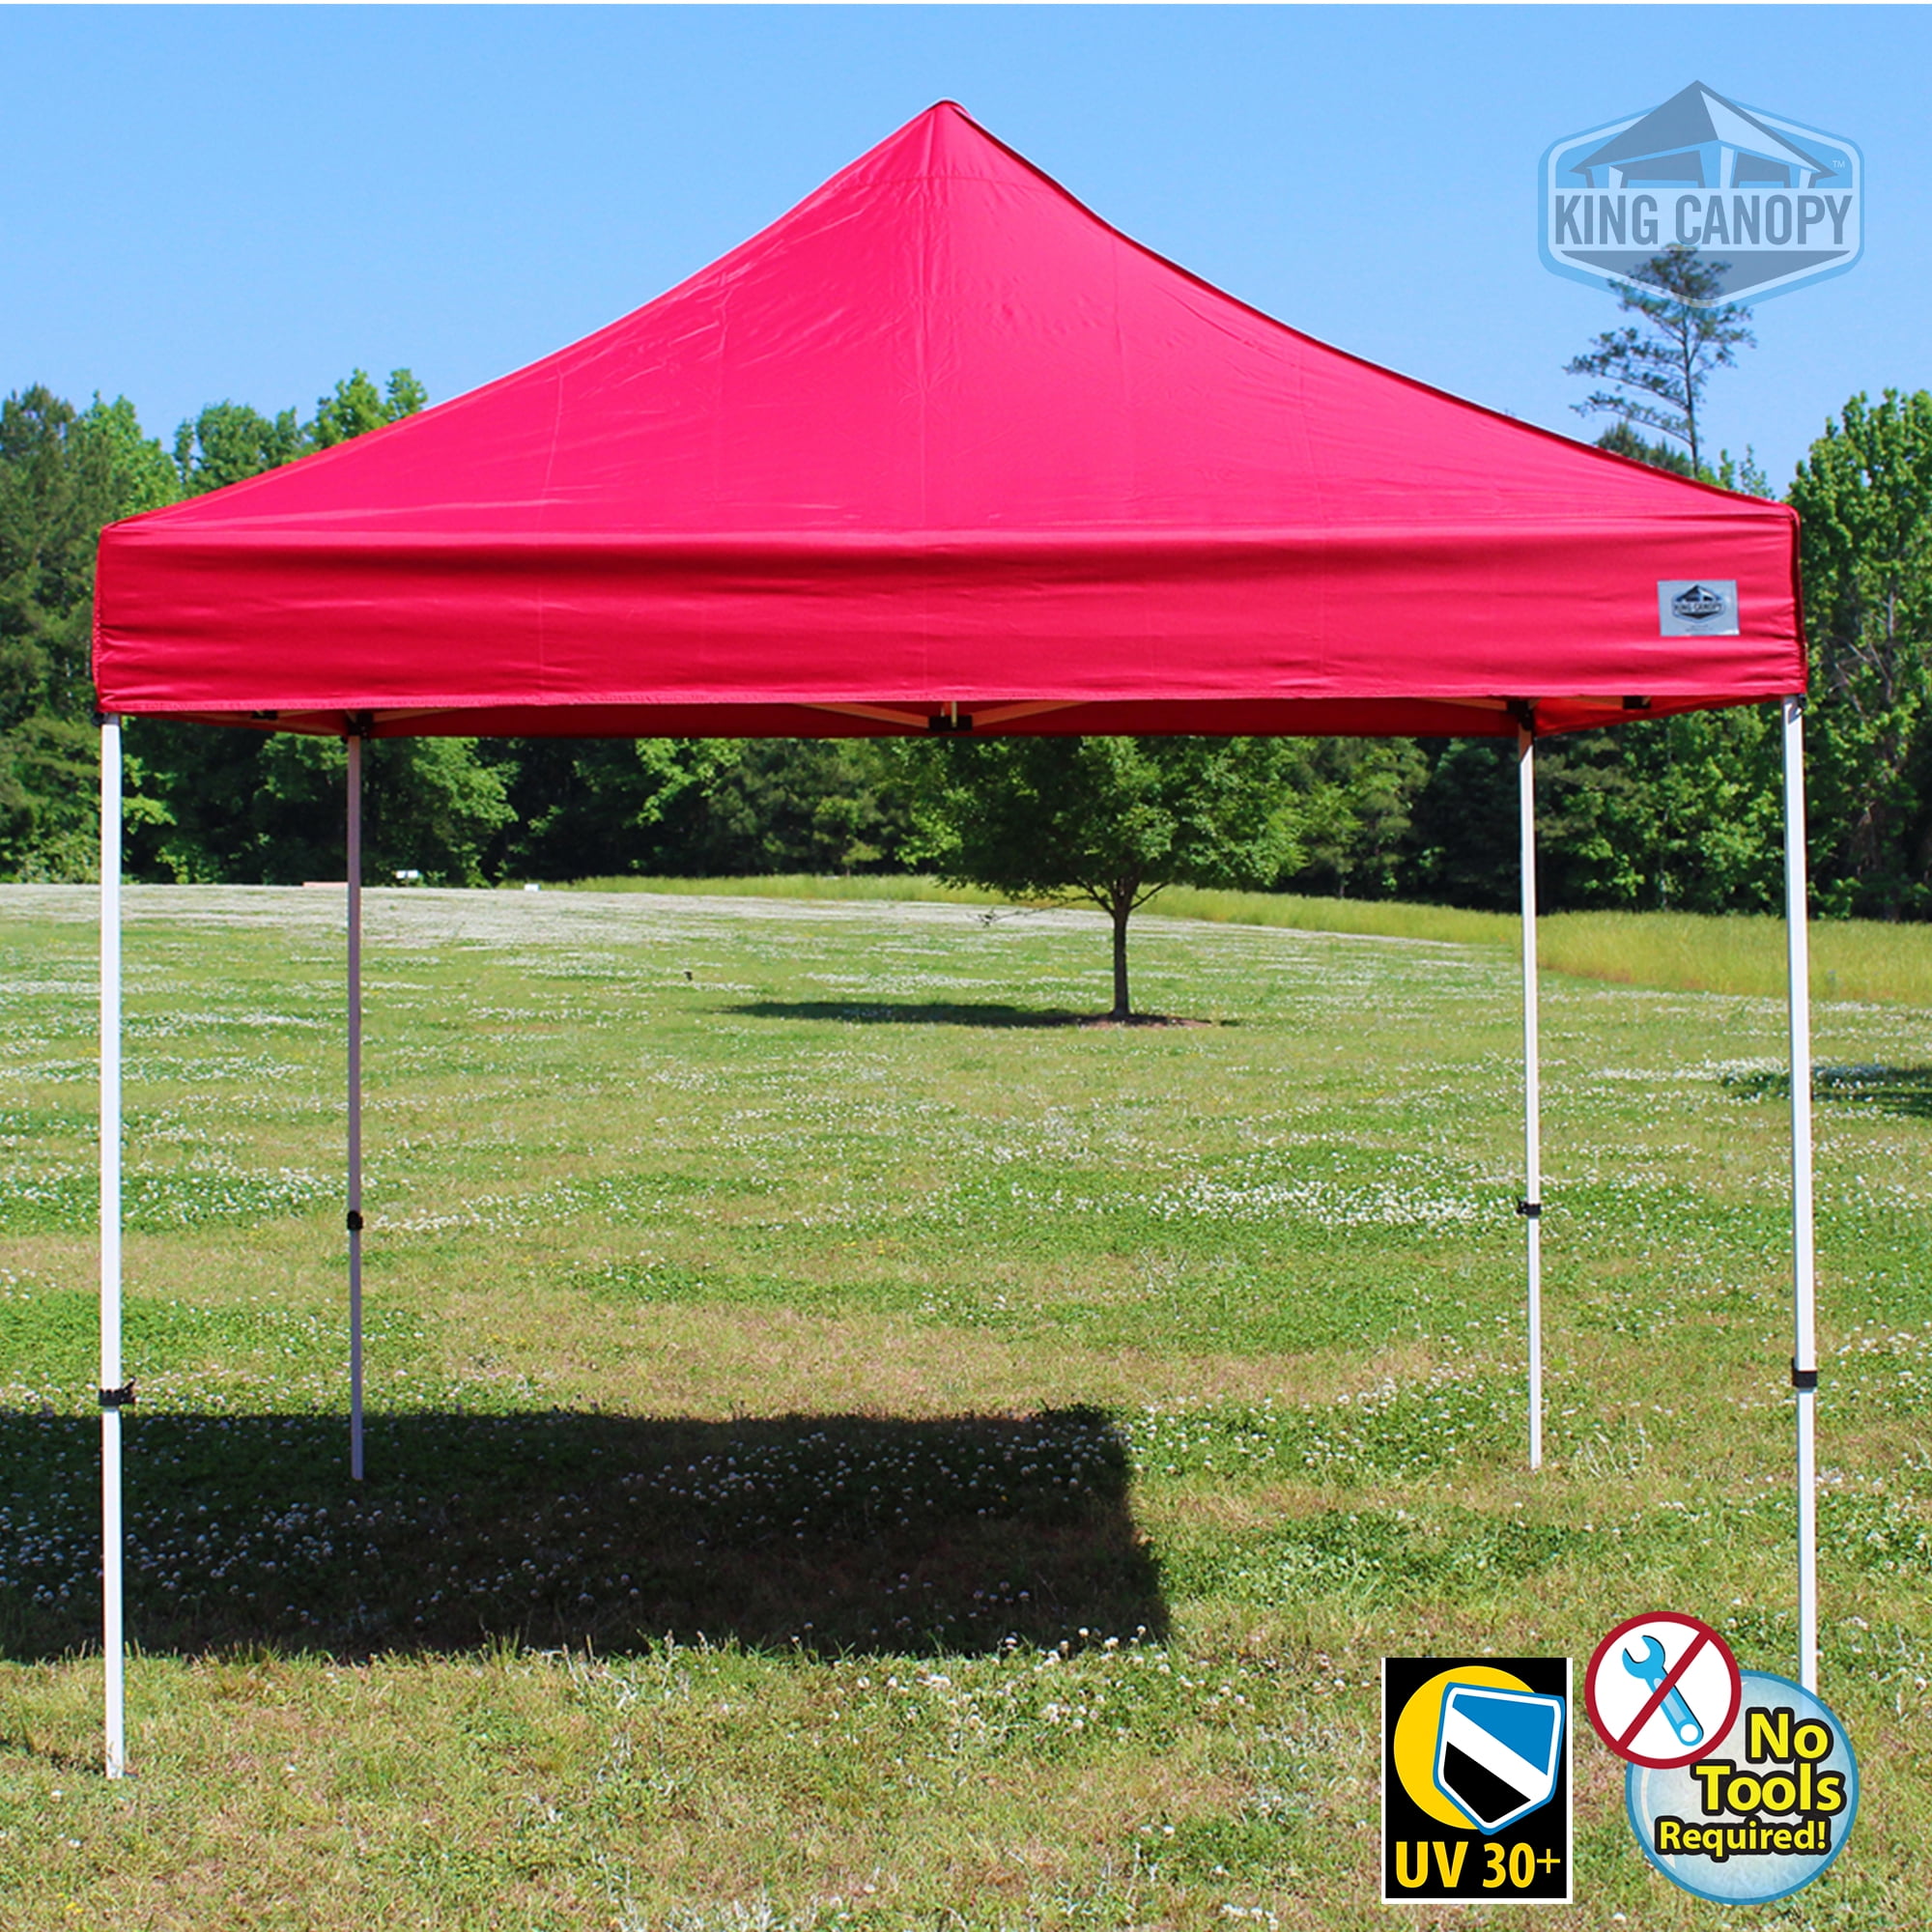 King Canopy FESTIVAL 10X10 Instant Pop Up Tent w/ RED 